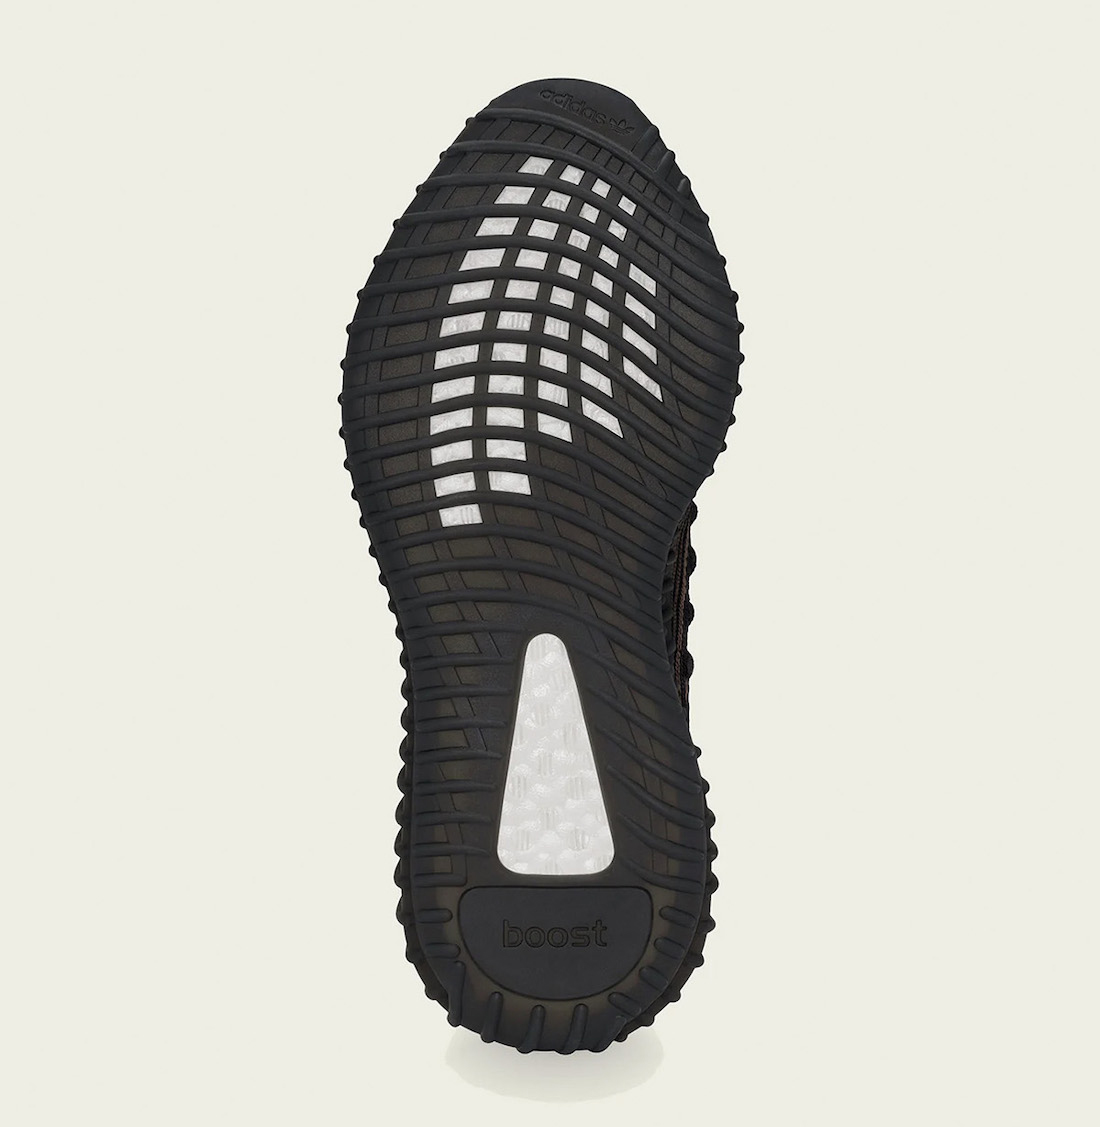 yeezy-350-v2-cmpct-slate-carbon-release-date-4